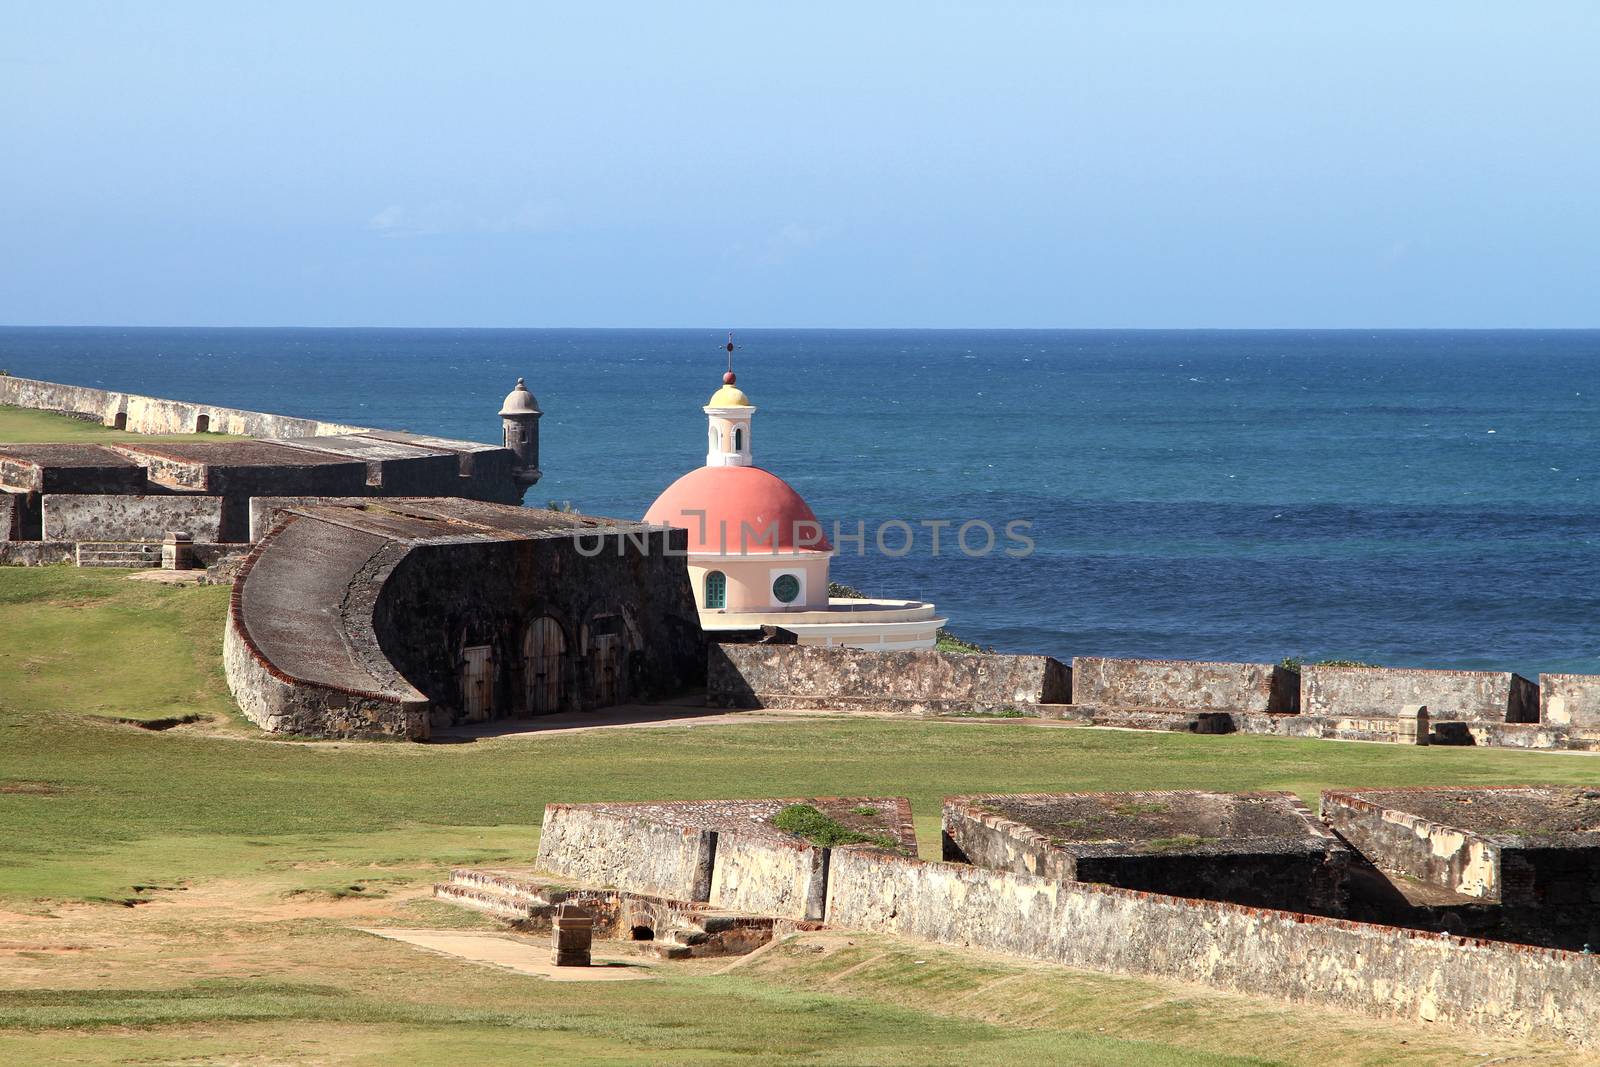 The eastern side of a San Juan national historic site.